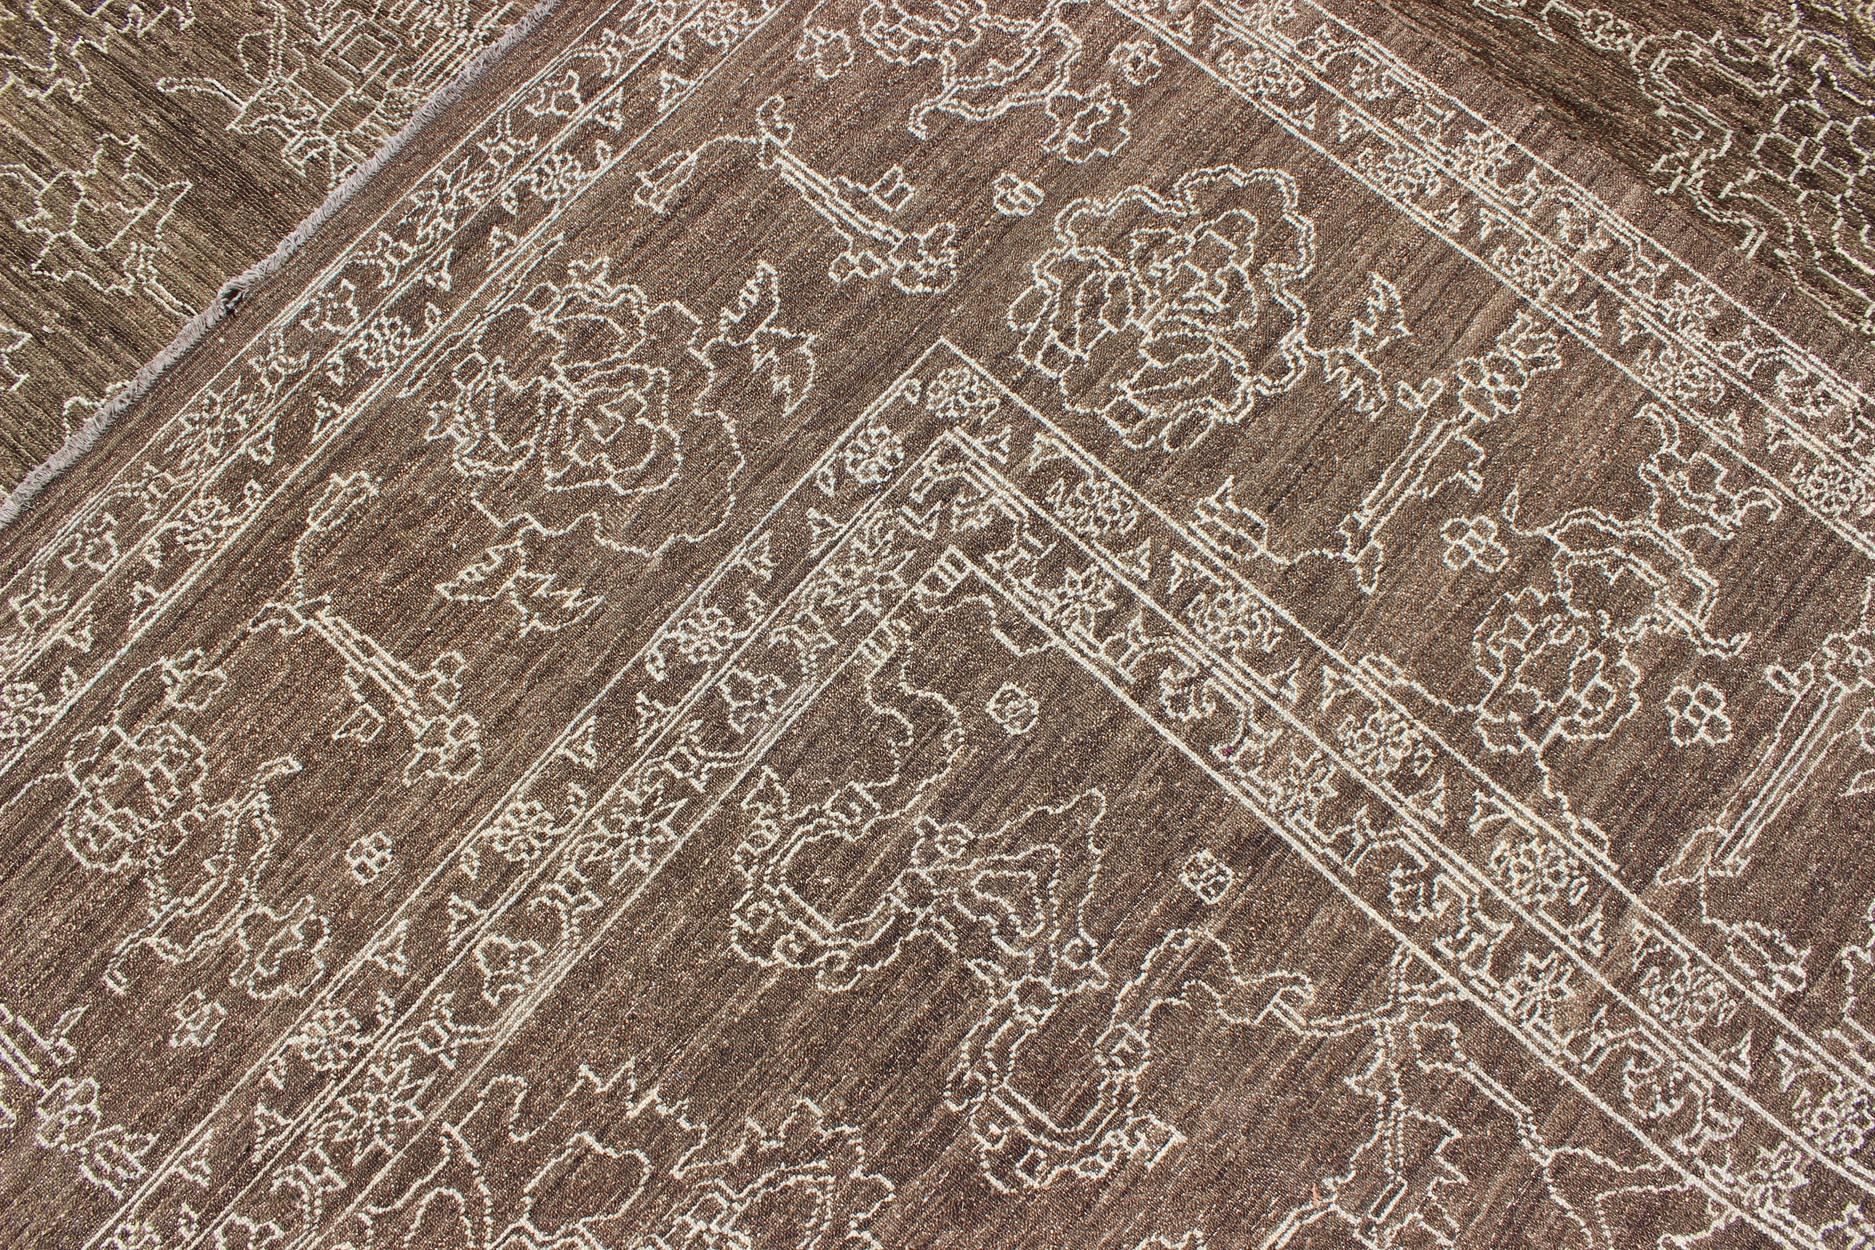 Oushak Fine Transitional Rug with Stylized Geometric Motifs in Brown & Tan For Sale